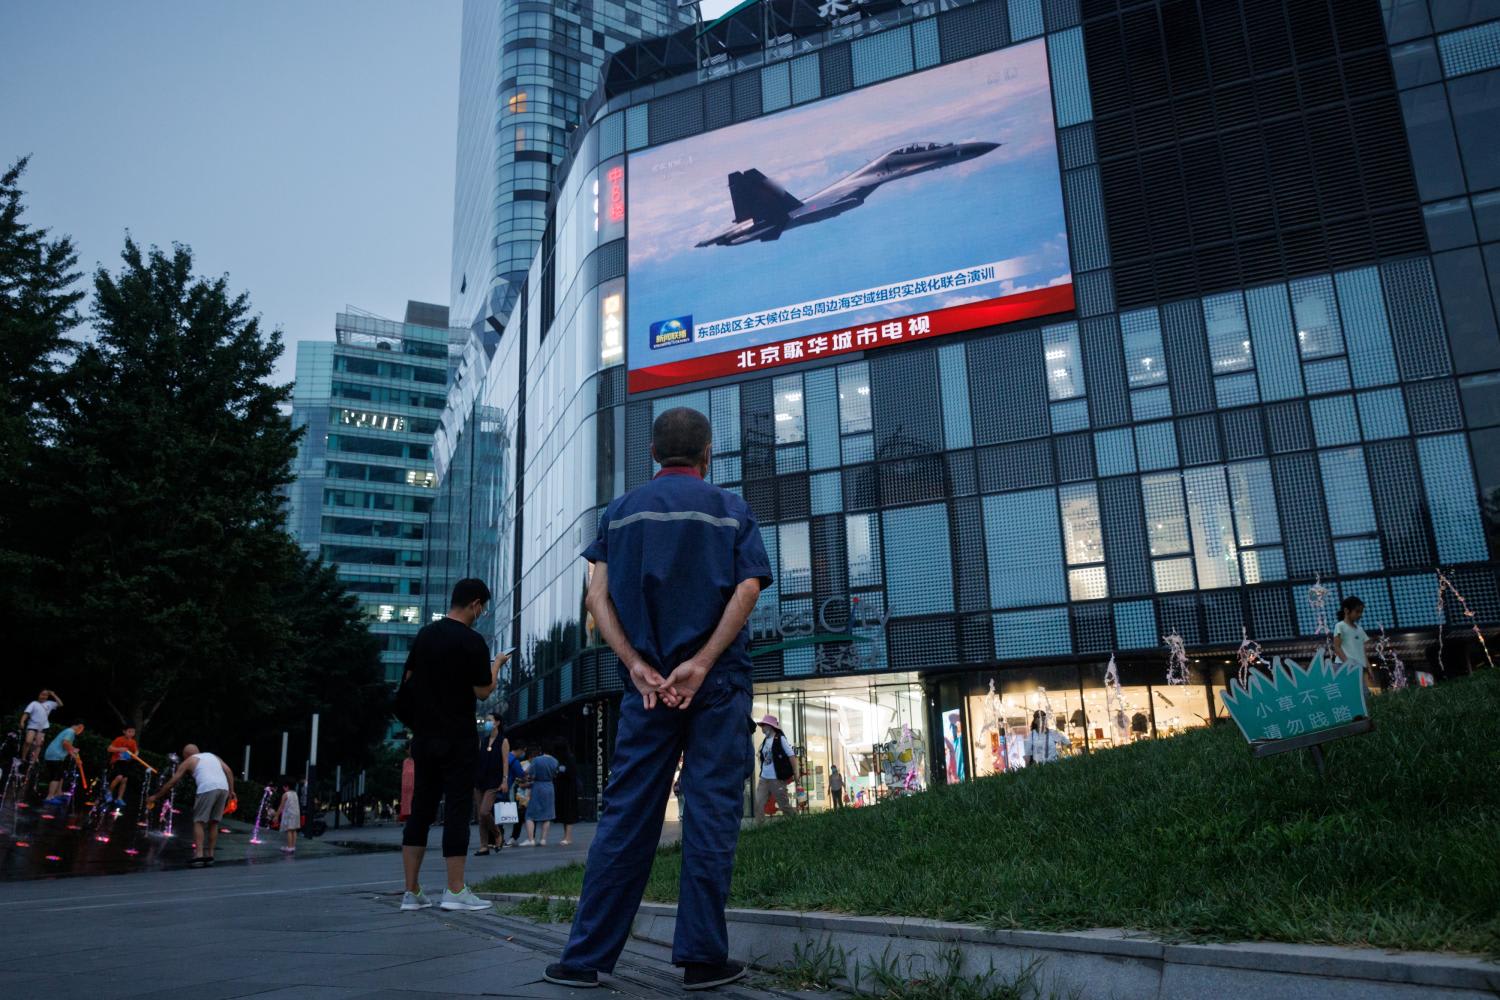 A man in Beijing watches a news broadcast showing a fighter jet during joint military operations near Taiwan on Aug 3, 2022.
